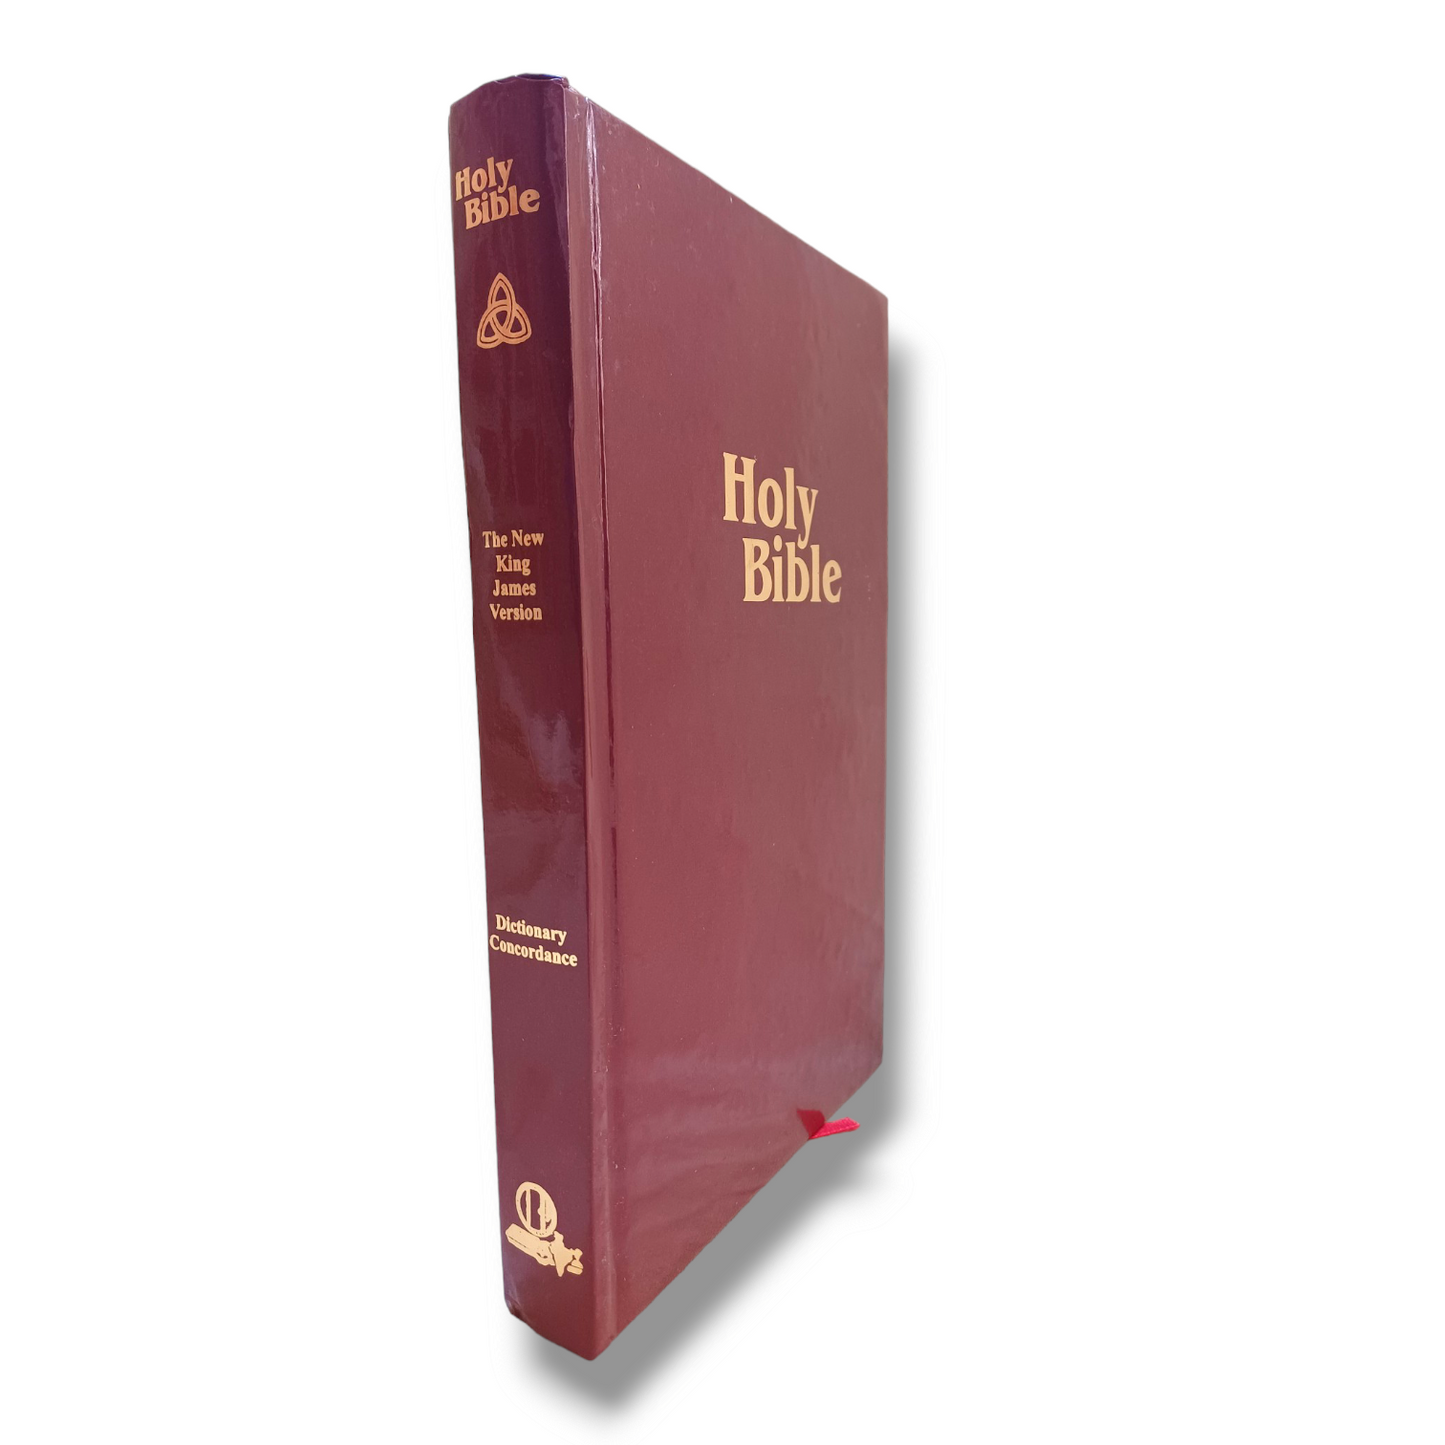 NKJV Holy Bible | Dictionary Concordance Bible | Hard Bound Edition | In Red Color Bound | New Edition